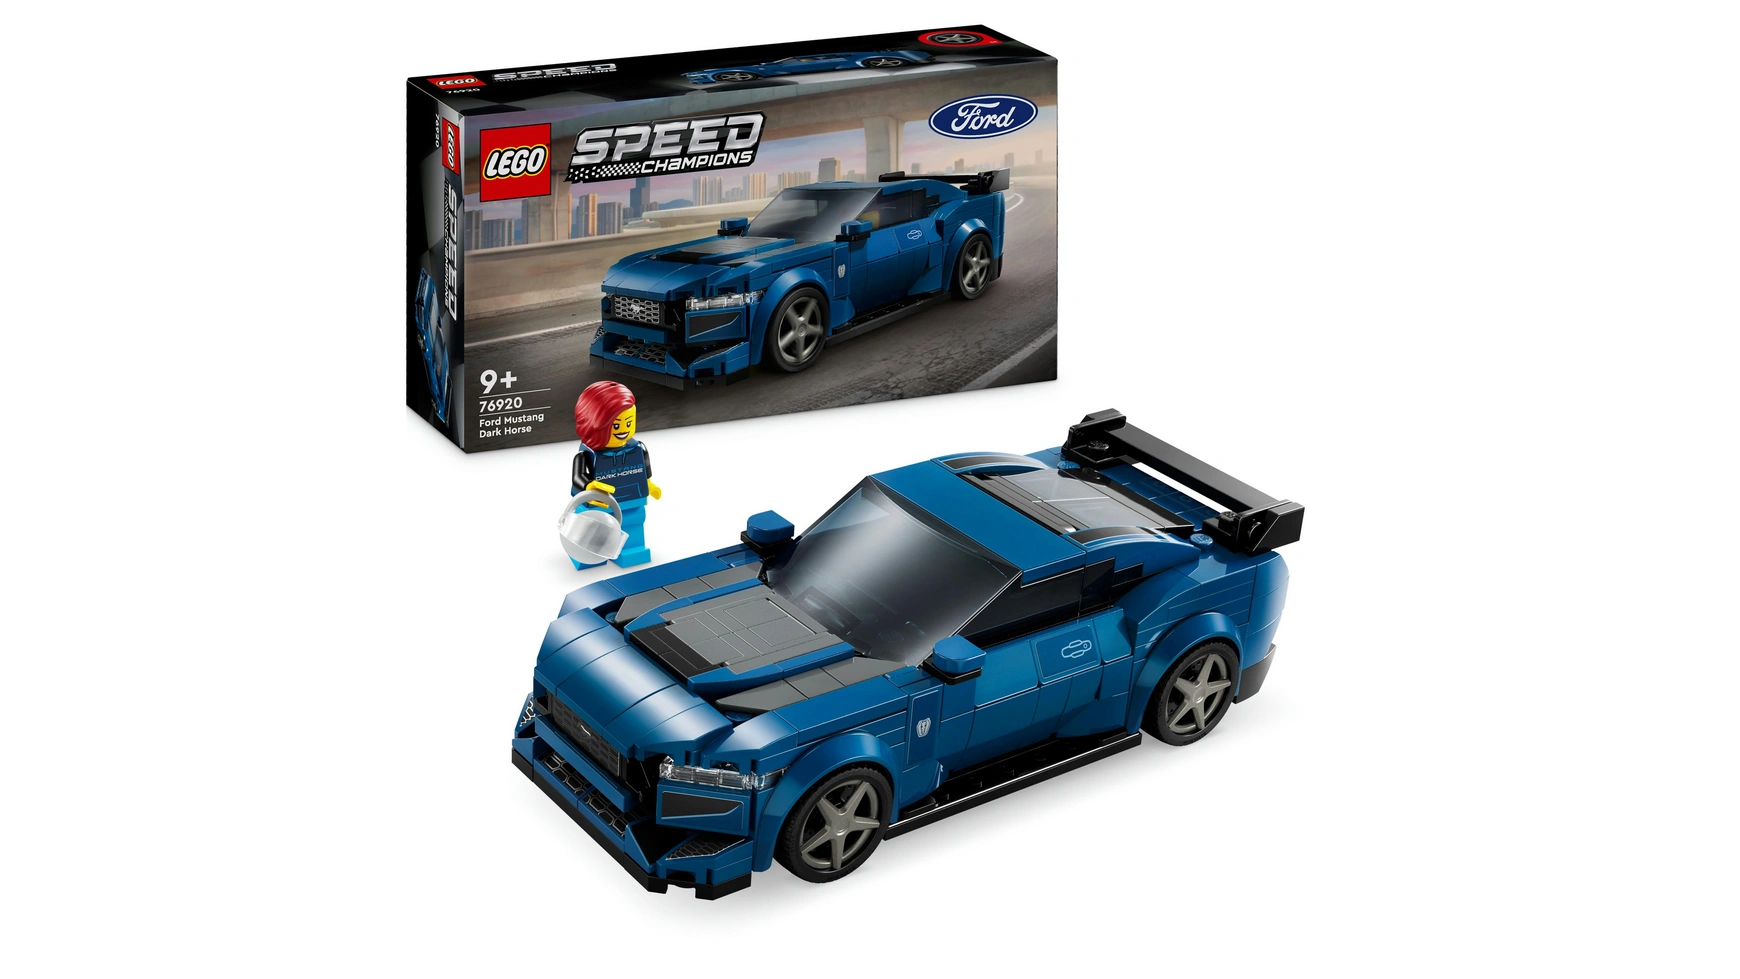 Lego Speed ​​​​Champions Игрушечный спортивный автомобиль Ford Mustang Dark Horse 4pcs sets new 0280150561 high impedance fuel injectors nozzle for ford mustang gt mach base car accessories fast delivery